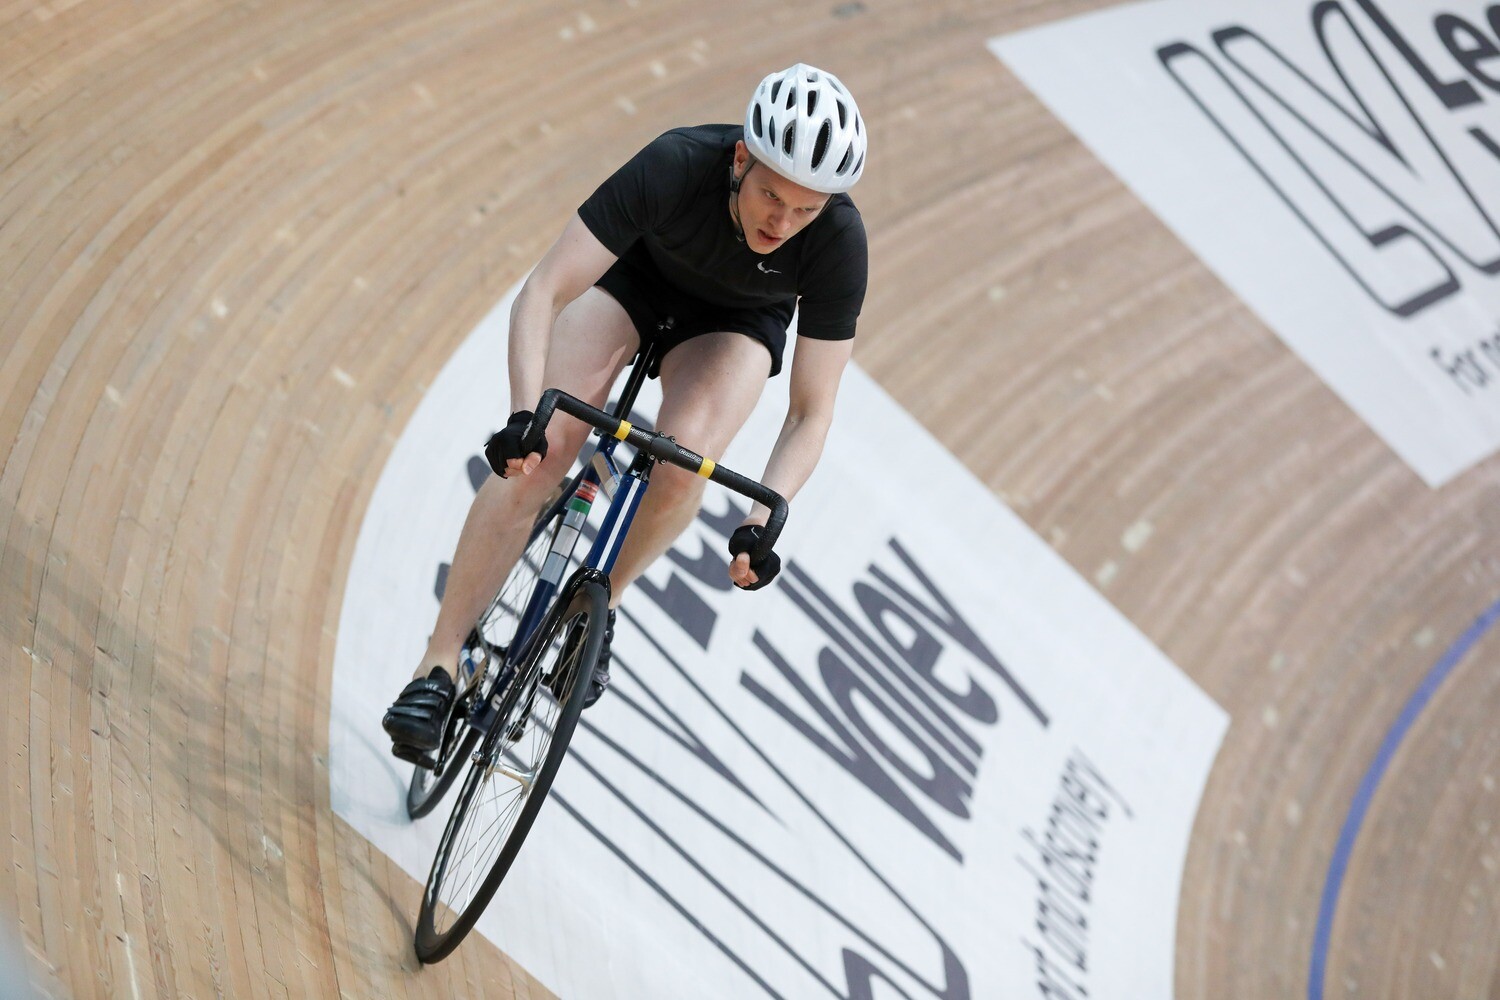 DEPOSIT: VIP TRACK CYCLING EXPERIENCE